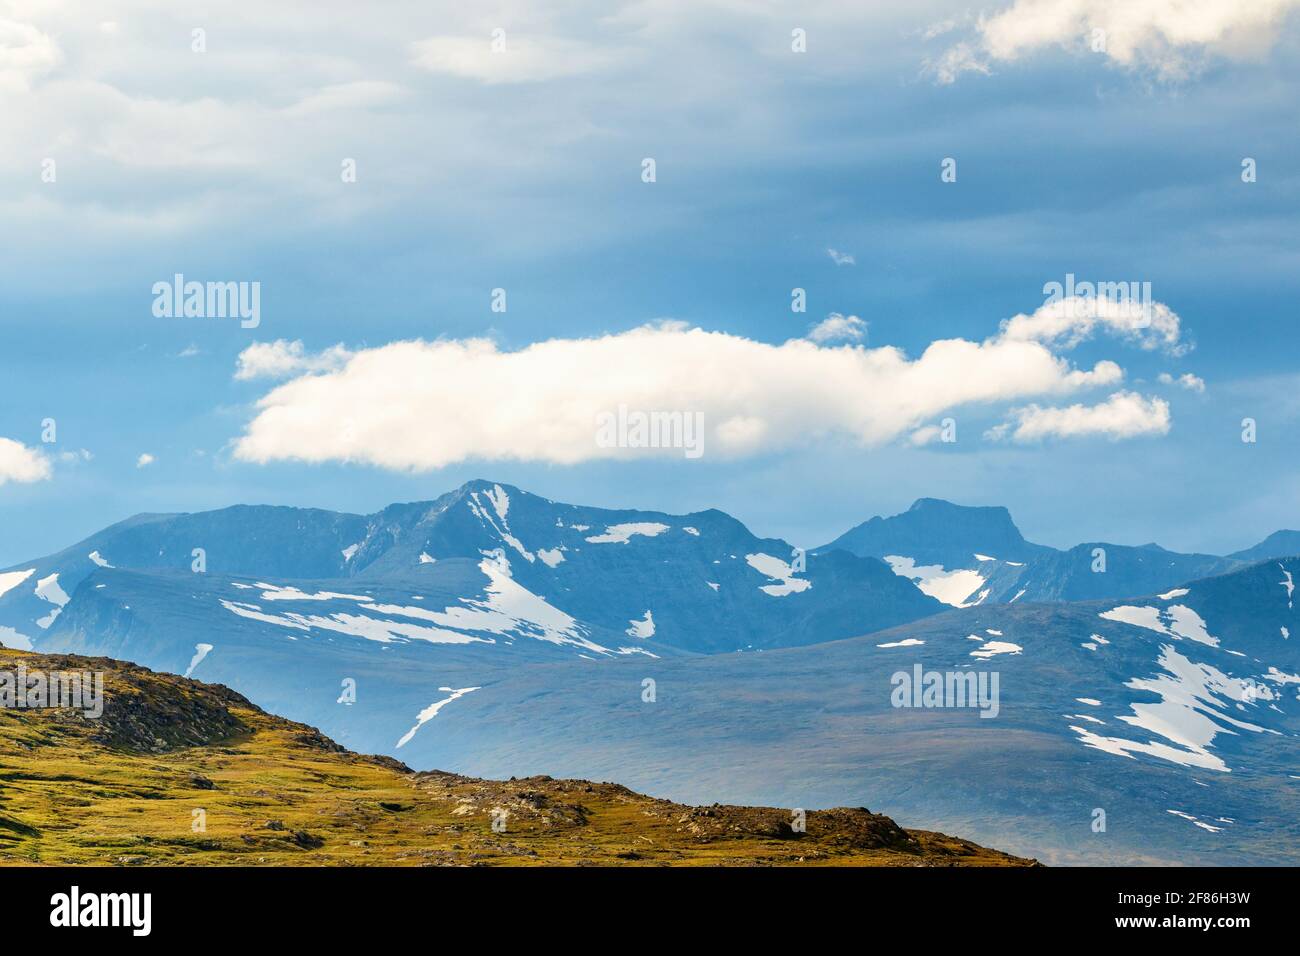 View of a mountain landscape with cloud formations Stock Photo